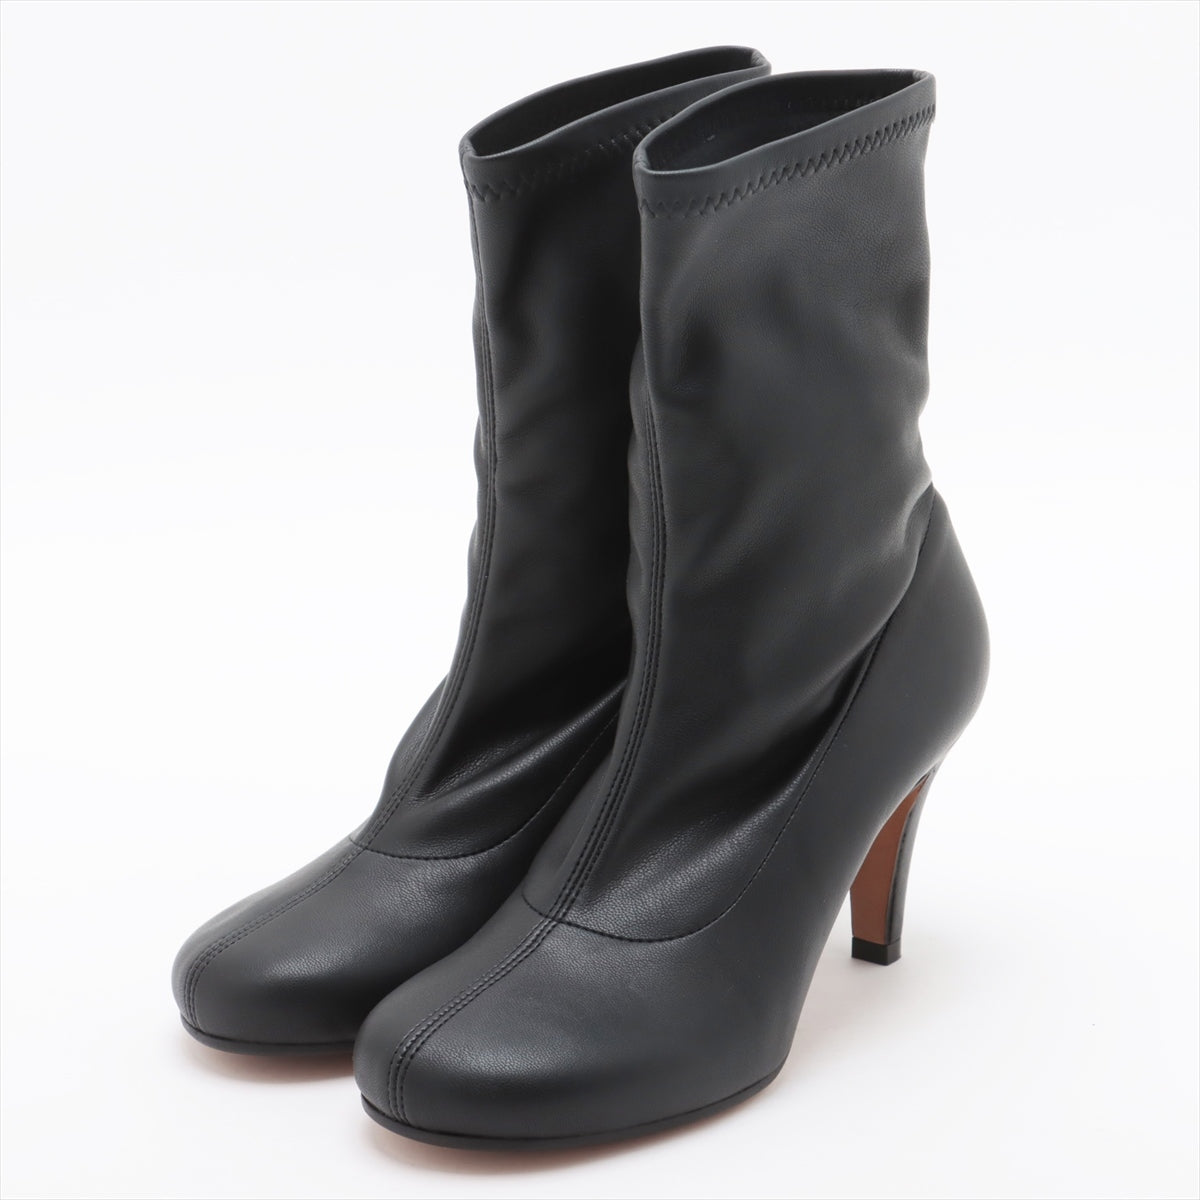 Maison Margiela 20AW Leather Boots 35 Ladies' Black S58WU0357 22 Missing insoles and heels